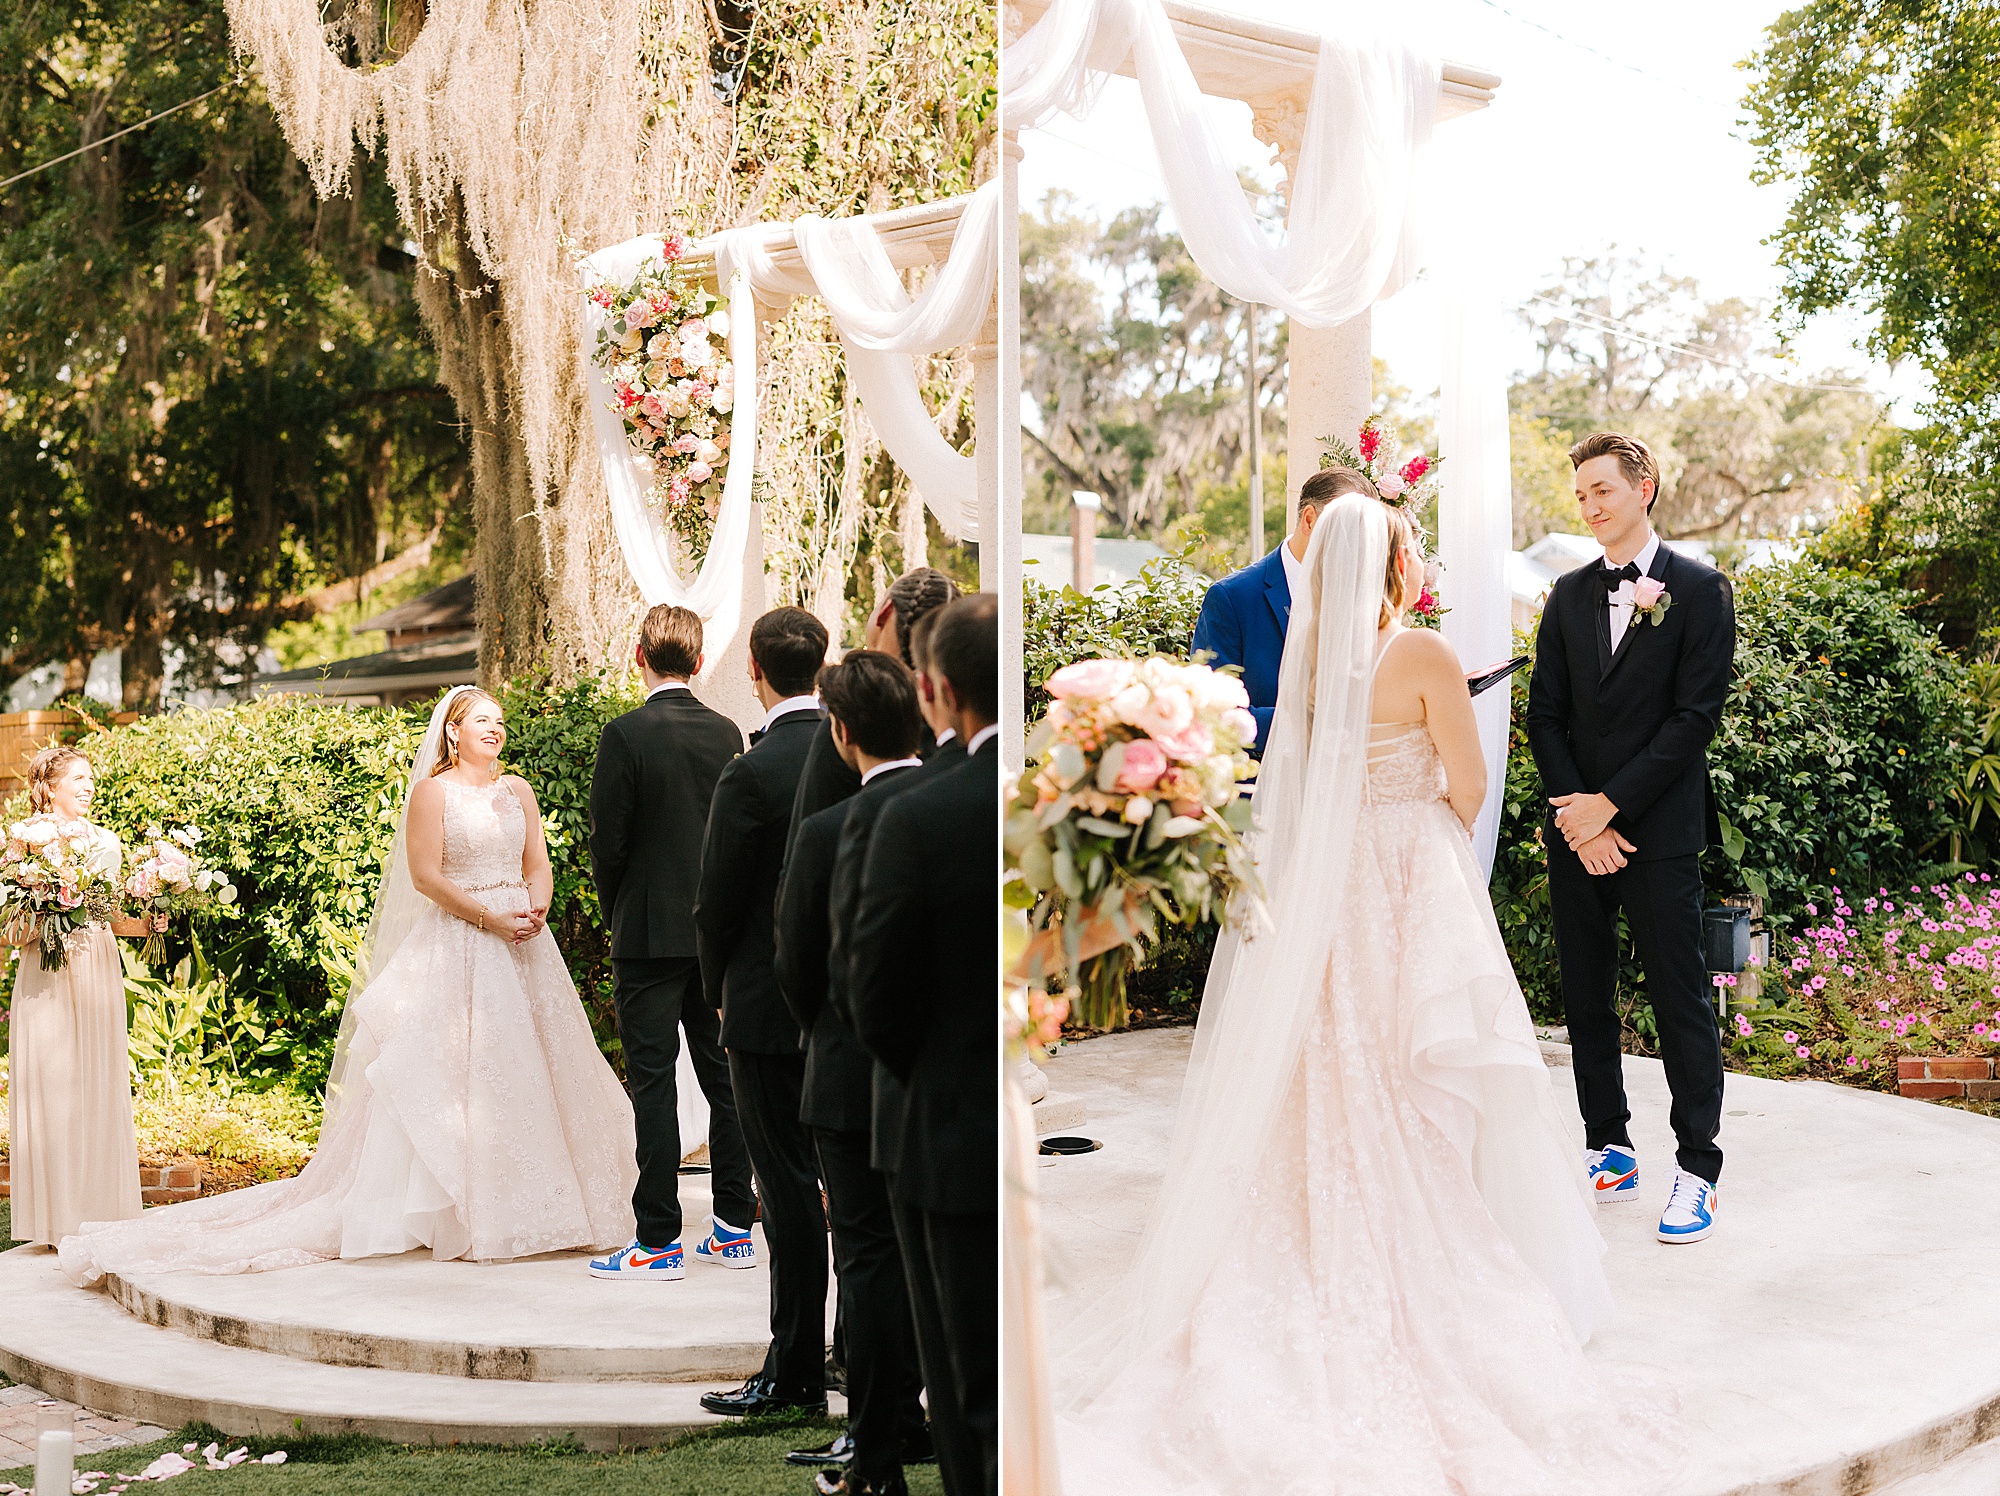 outdoor wedding ceremony in Florida under arbor with draped white cloth